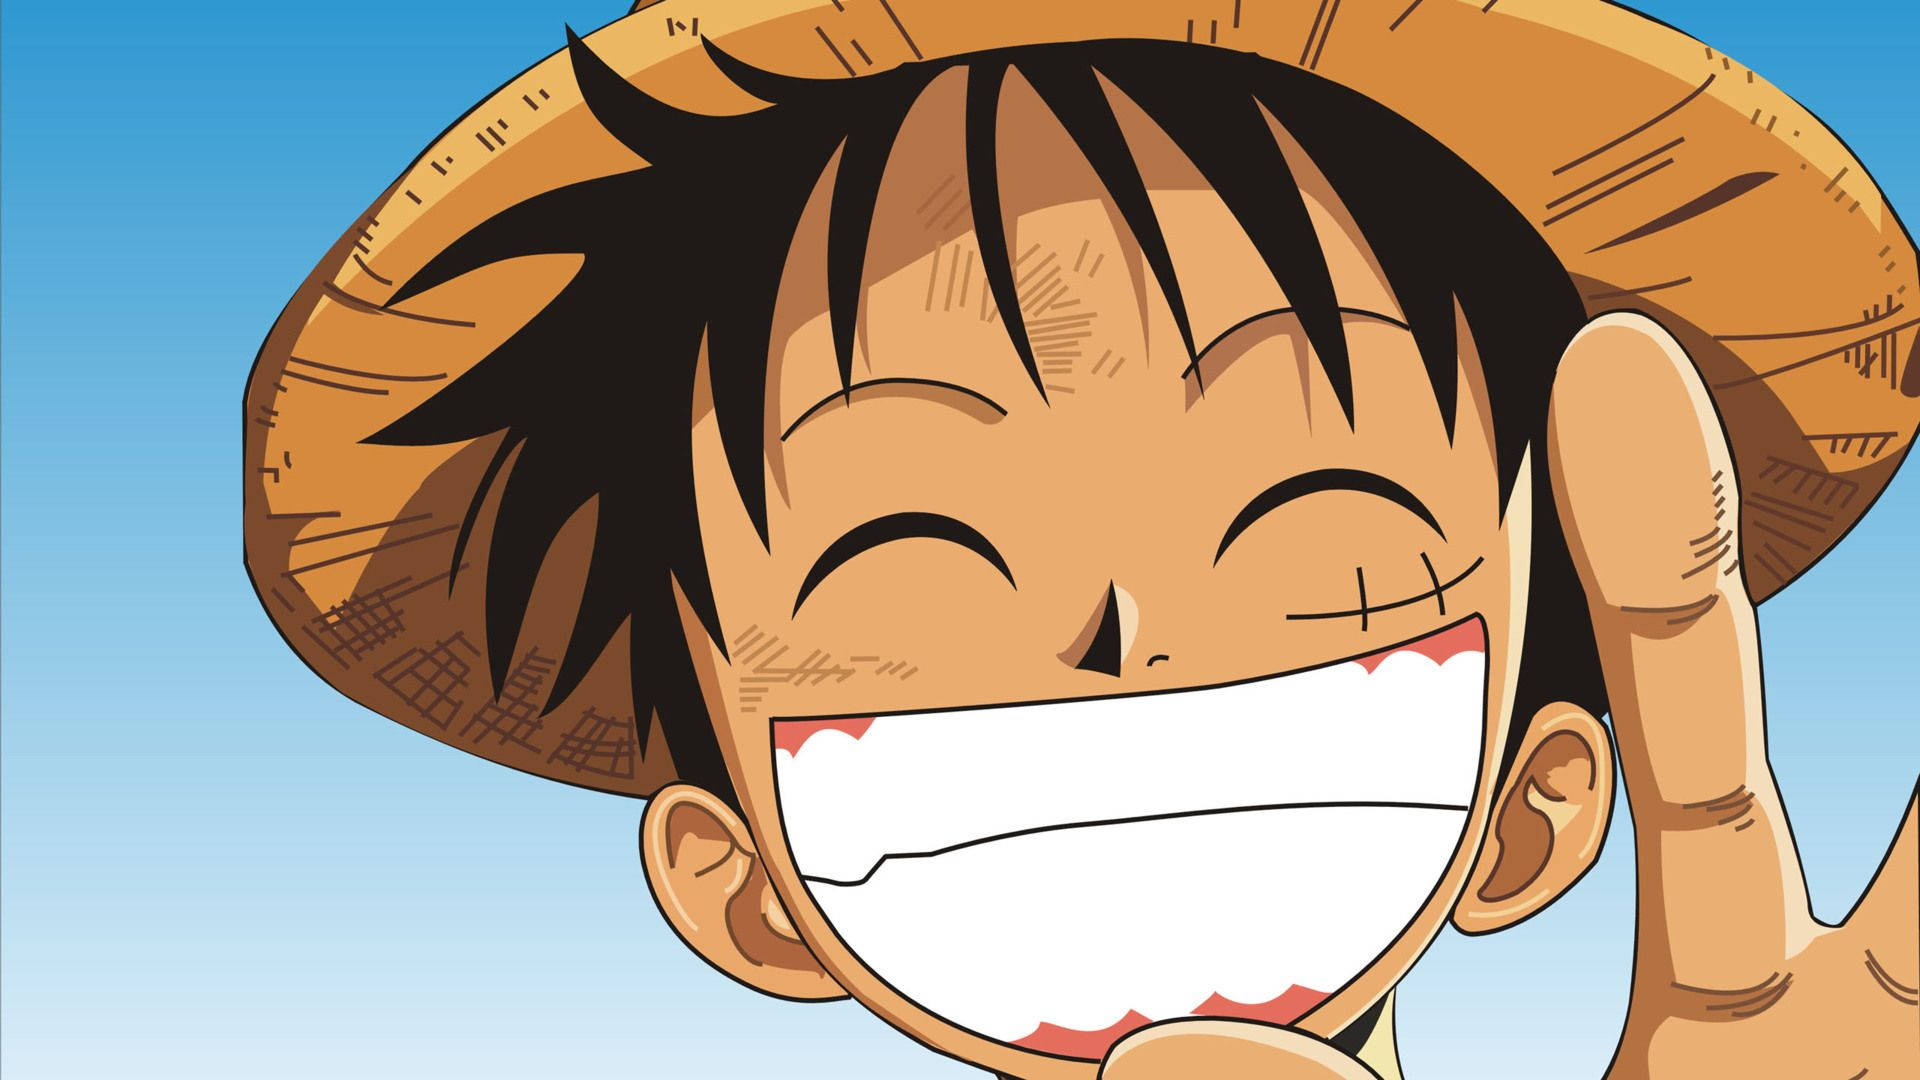 Free Luffy Smile Wallpaper Downloads, [100+] Luffy Smile Wallpapers for  FREE 